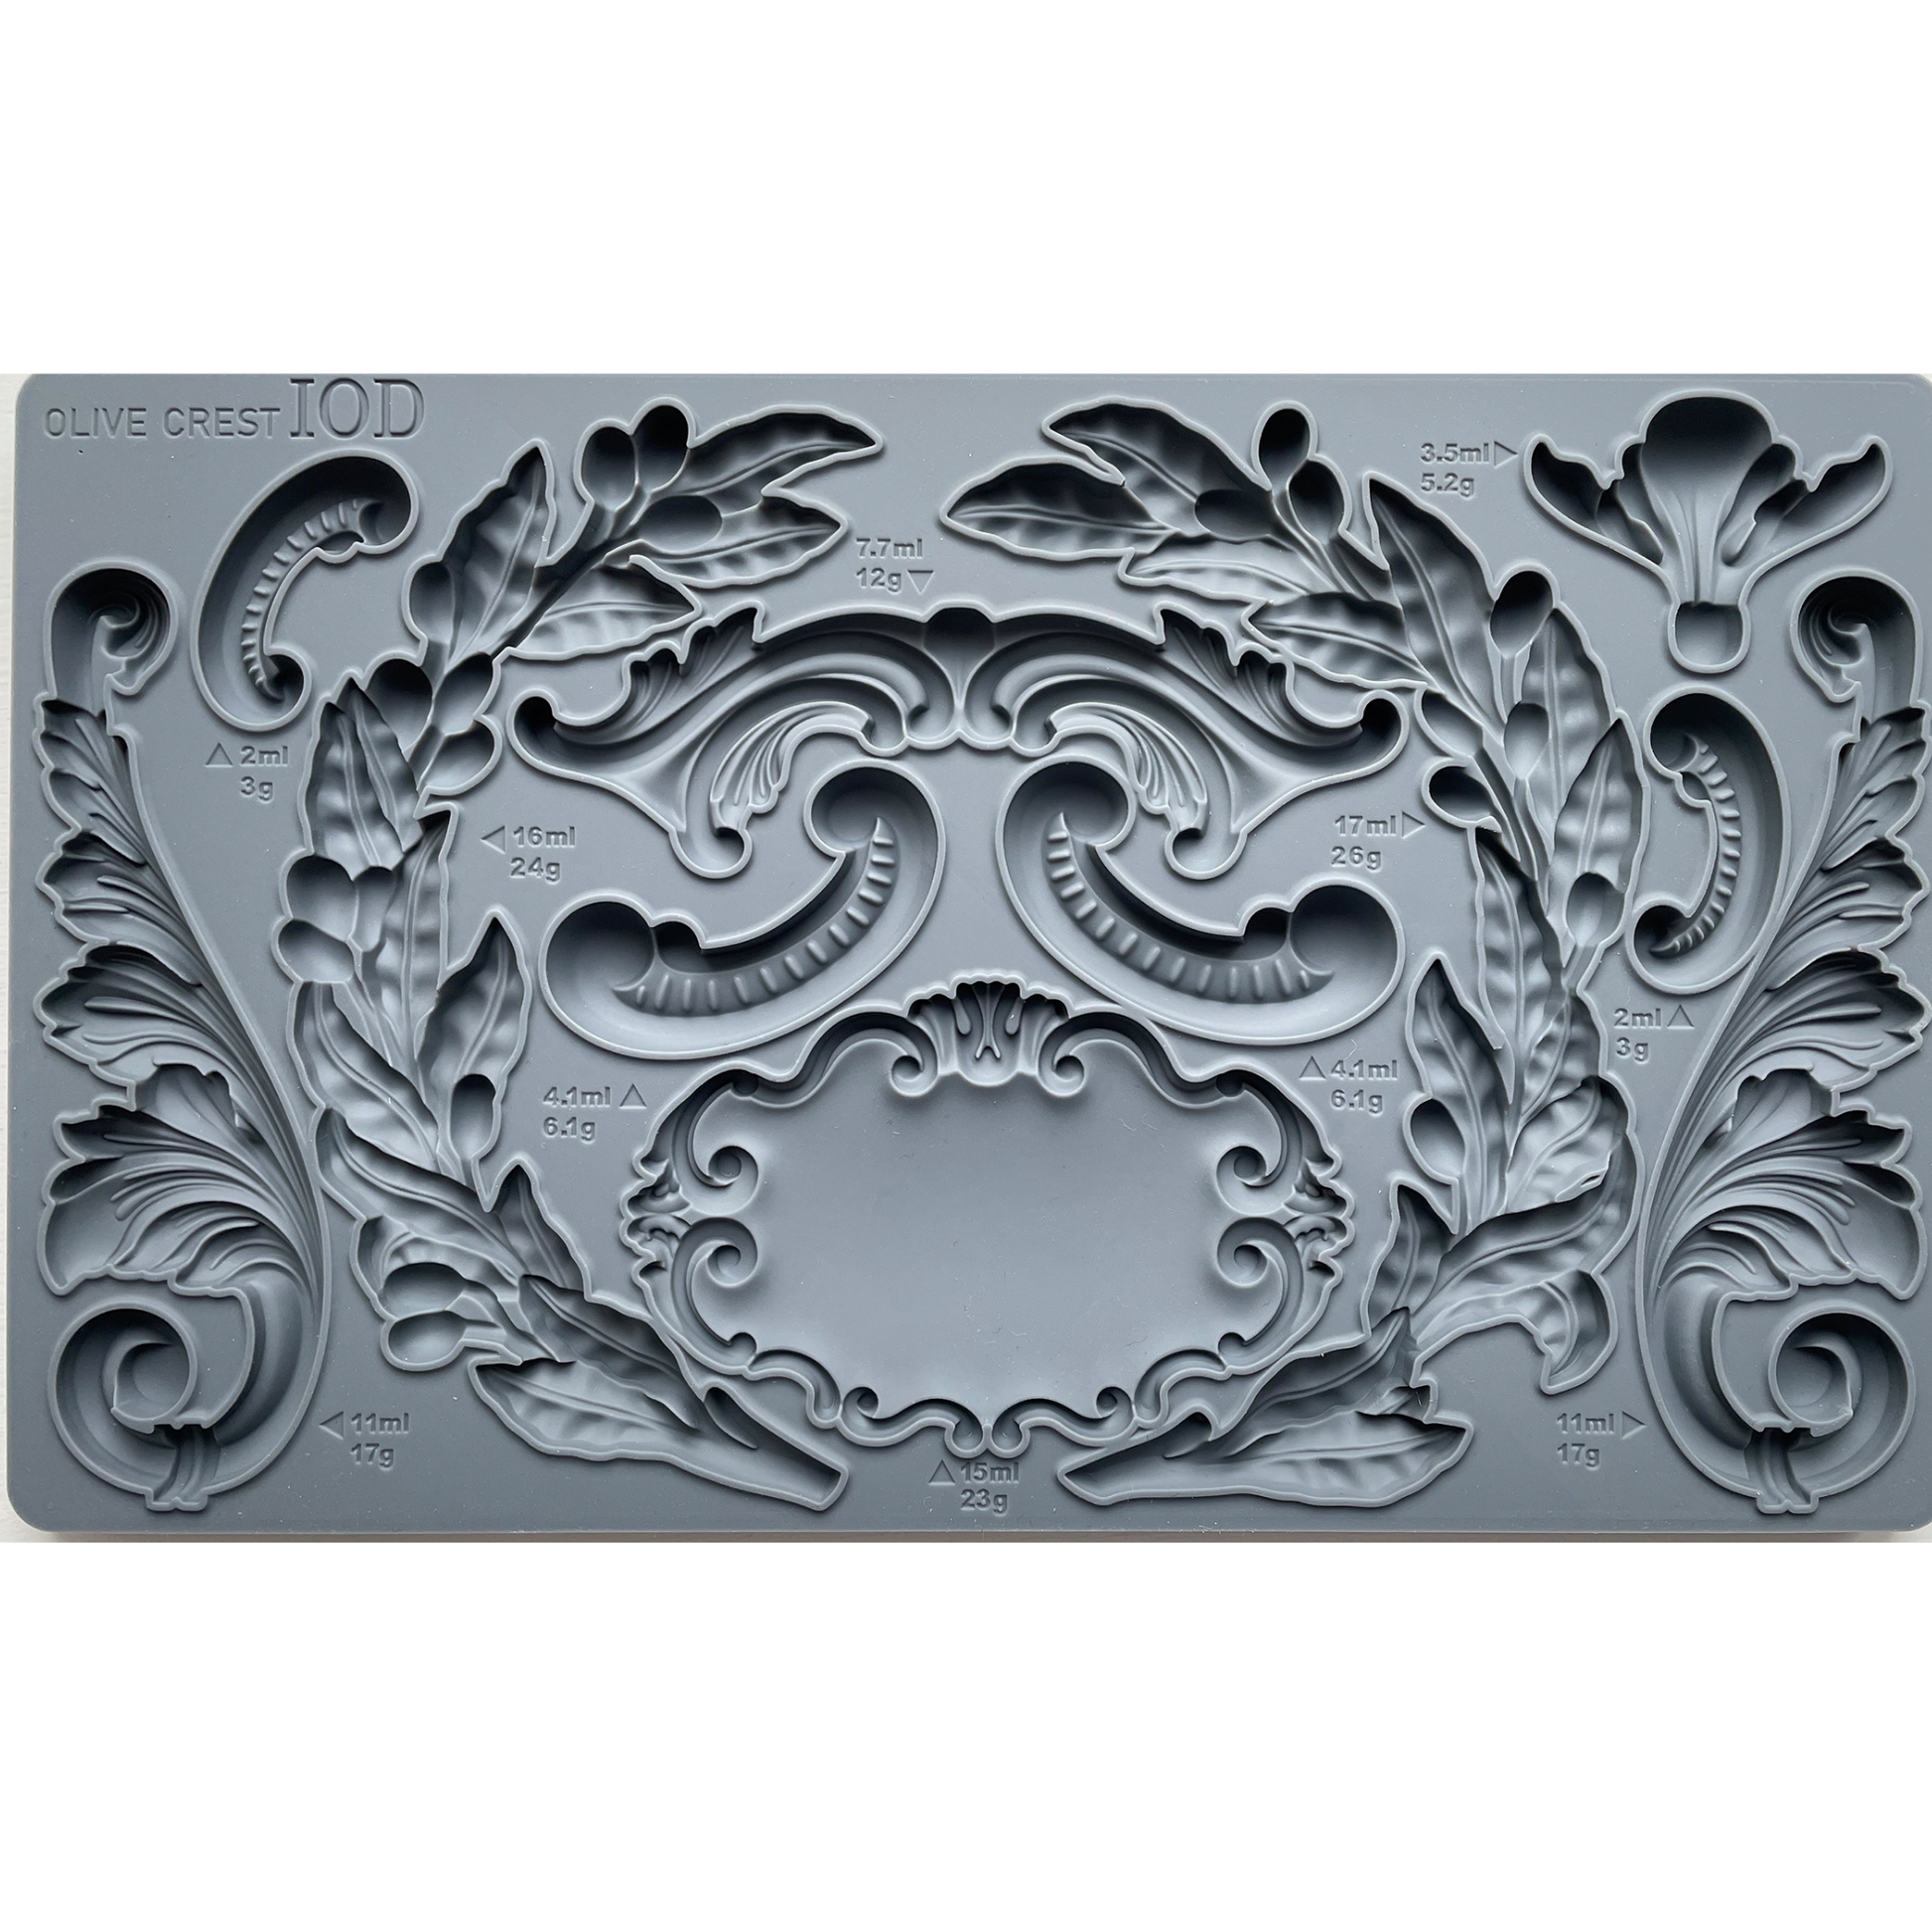 Olive Crest IOD Silicone Mold by Iron Orchid Designs.  6" x 10" mold available at Milton's Daughter.